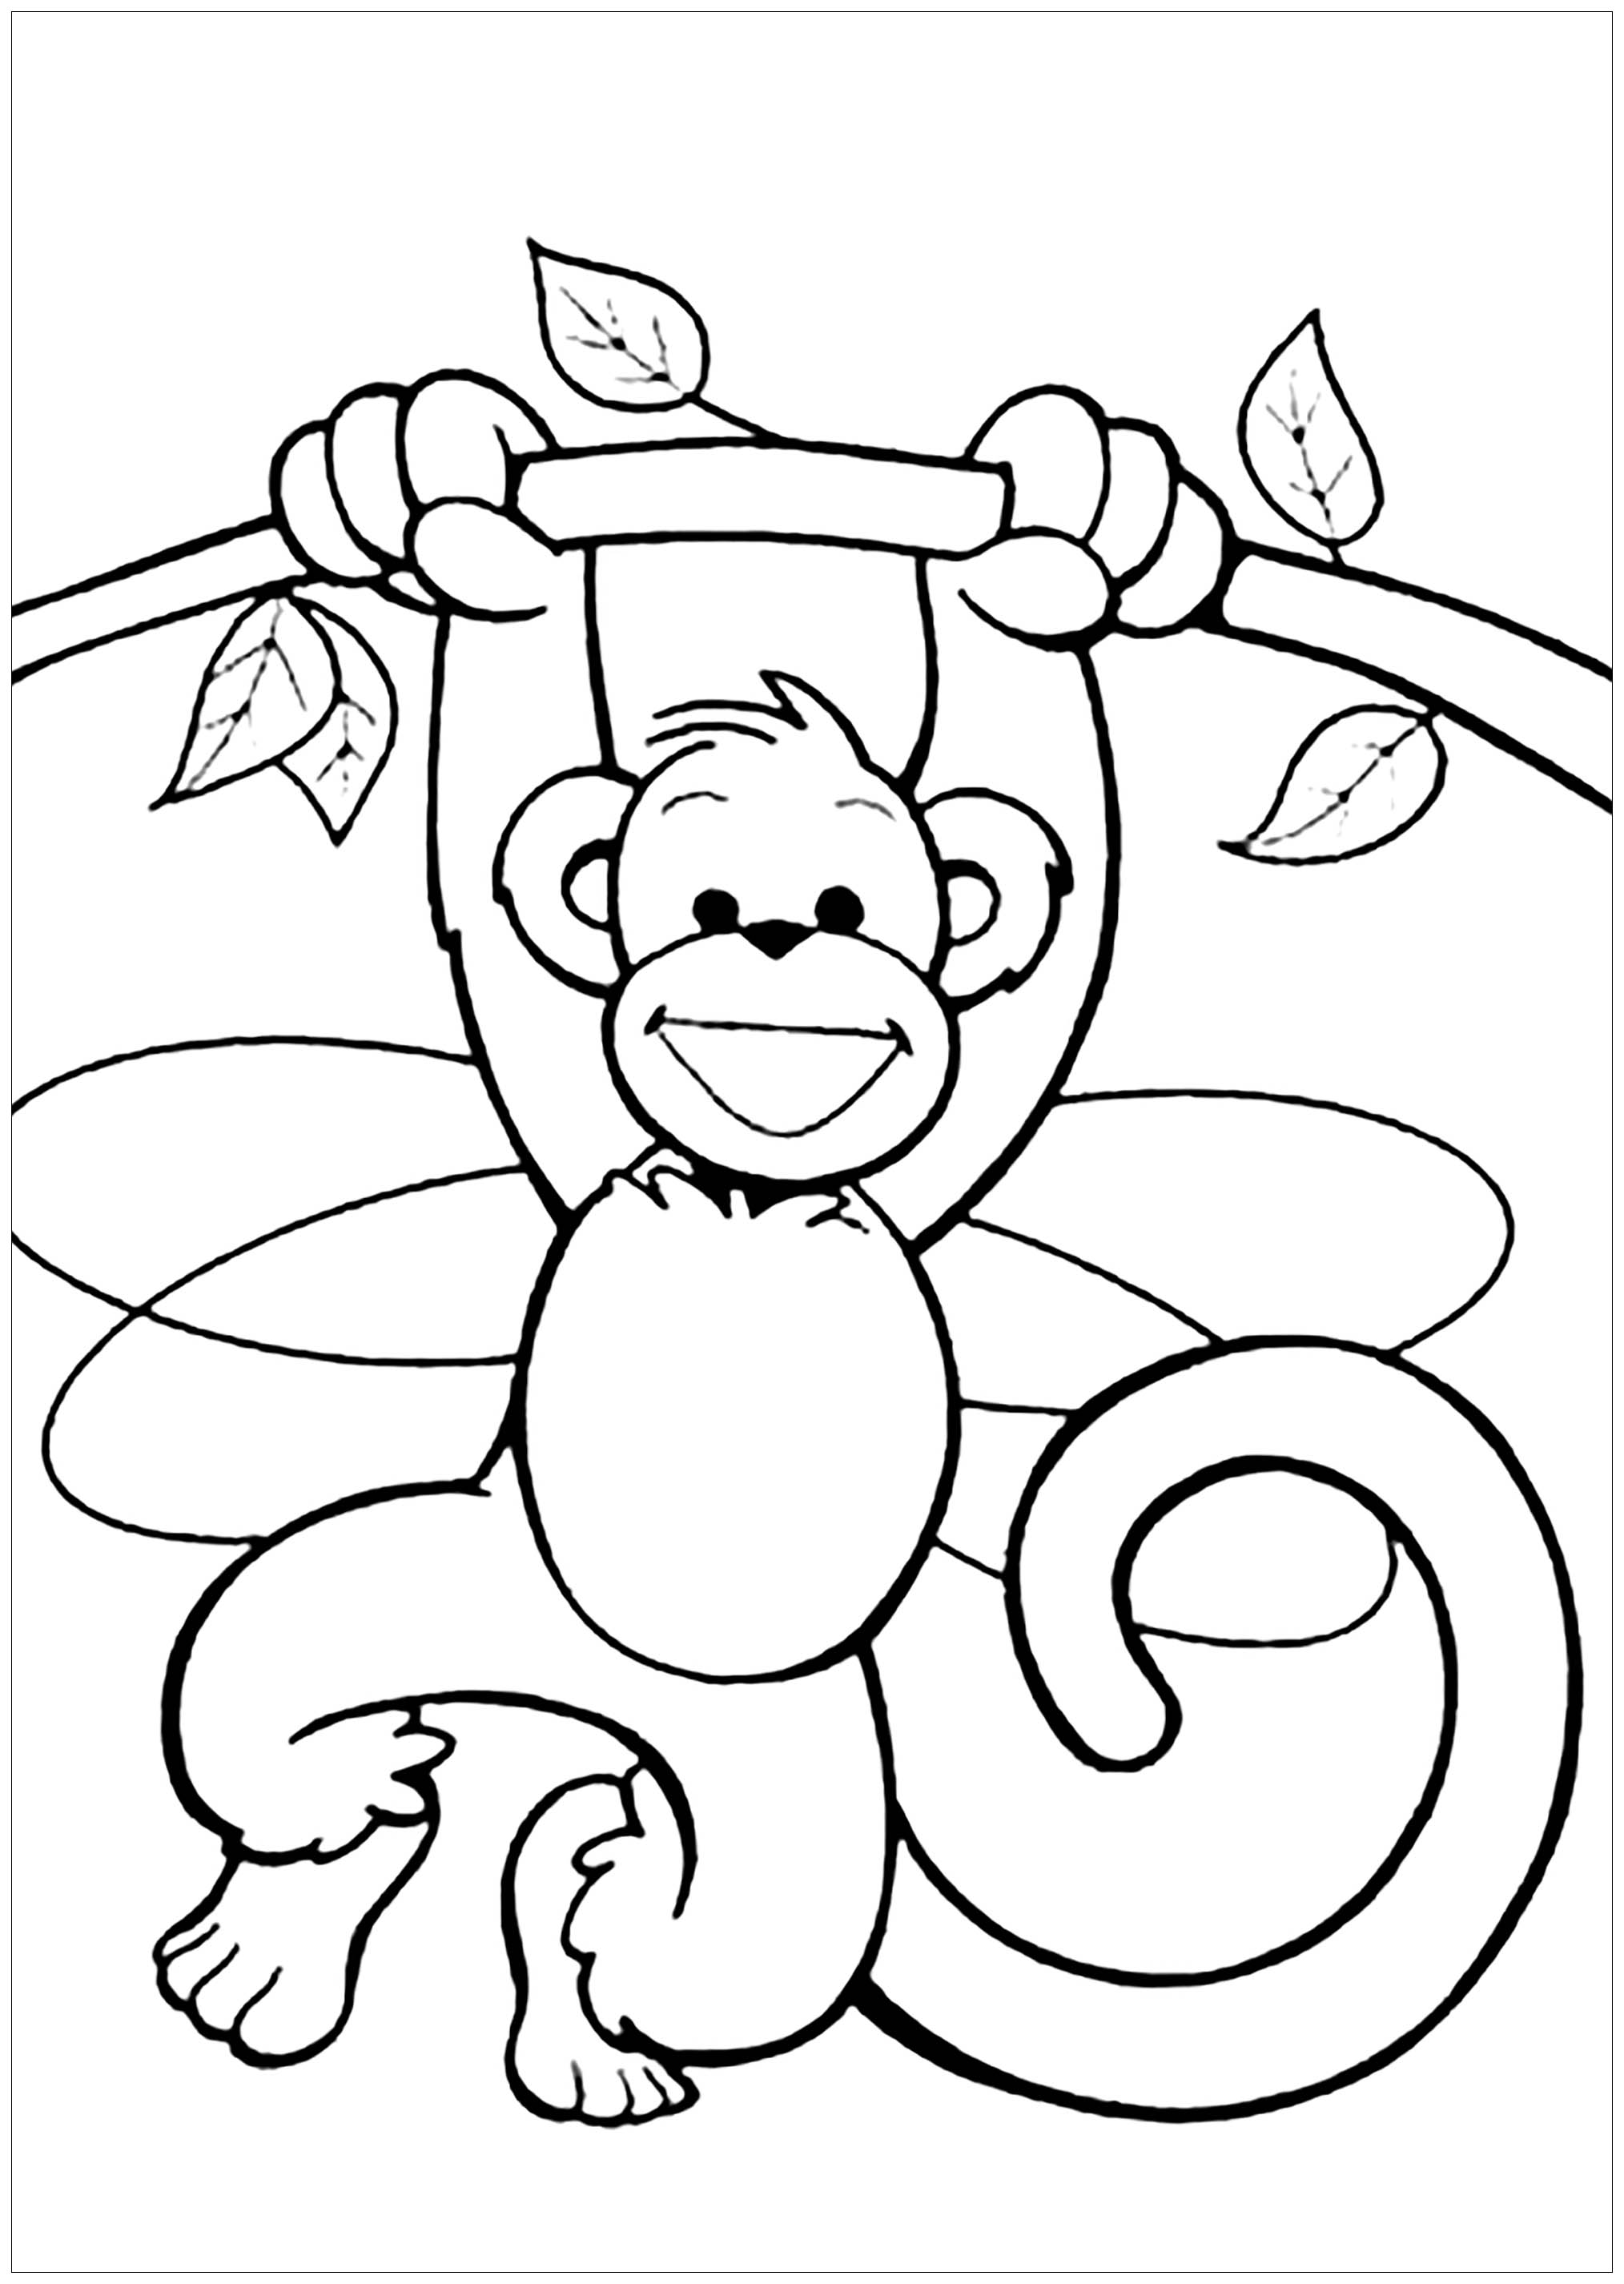 Download Monkeys to download for free - Monkeys Kids Coloring Pages